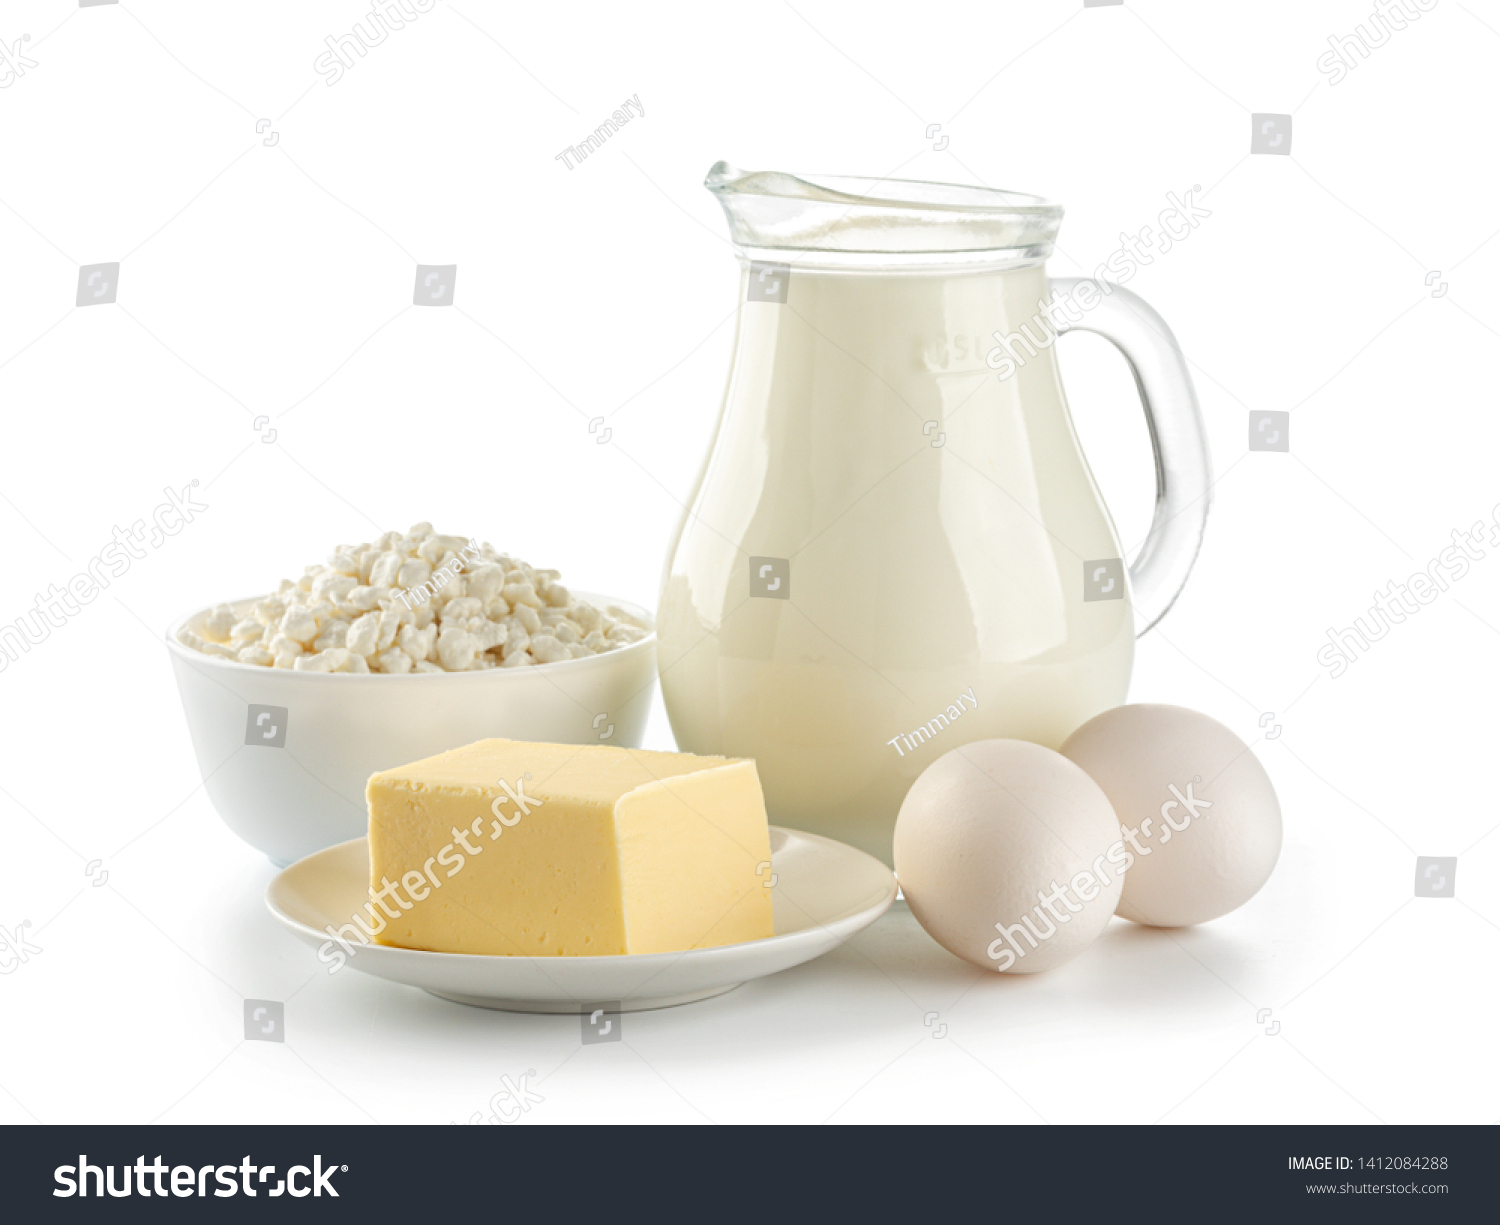 Organic dairy products isolated on a white background #1412084288